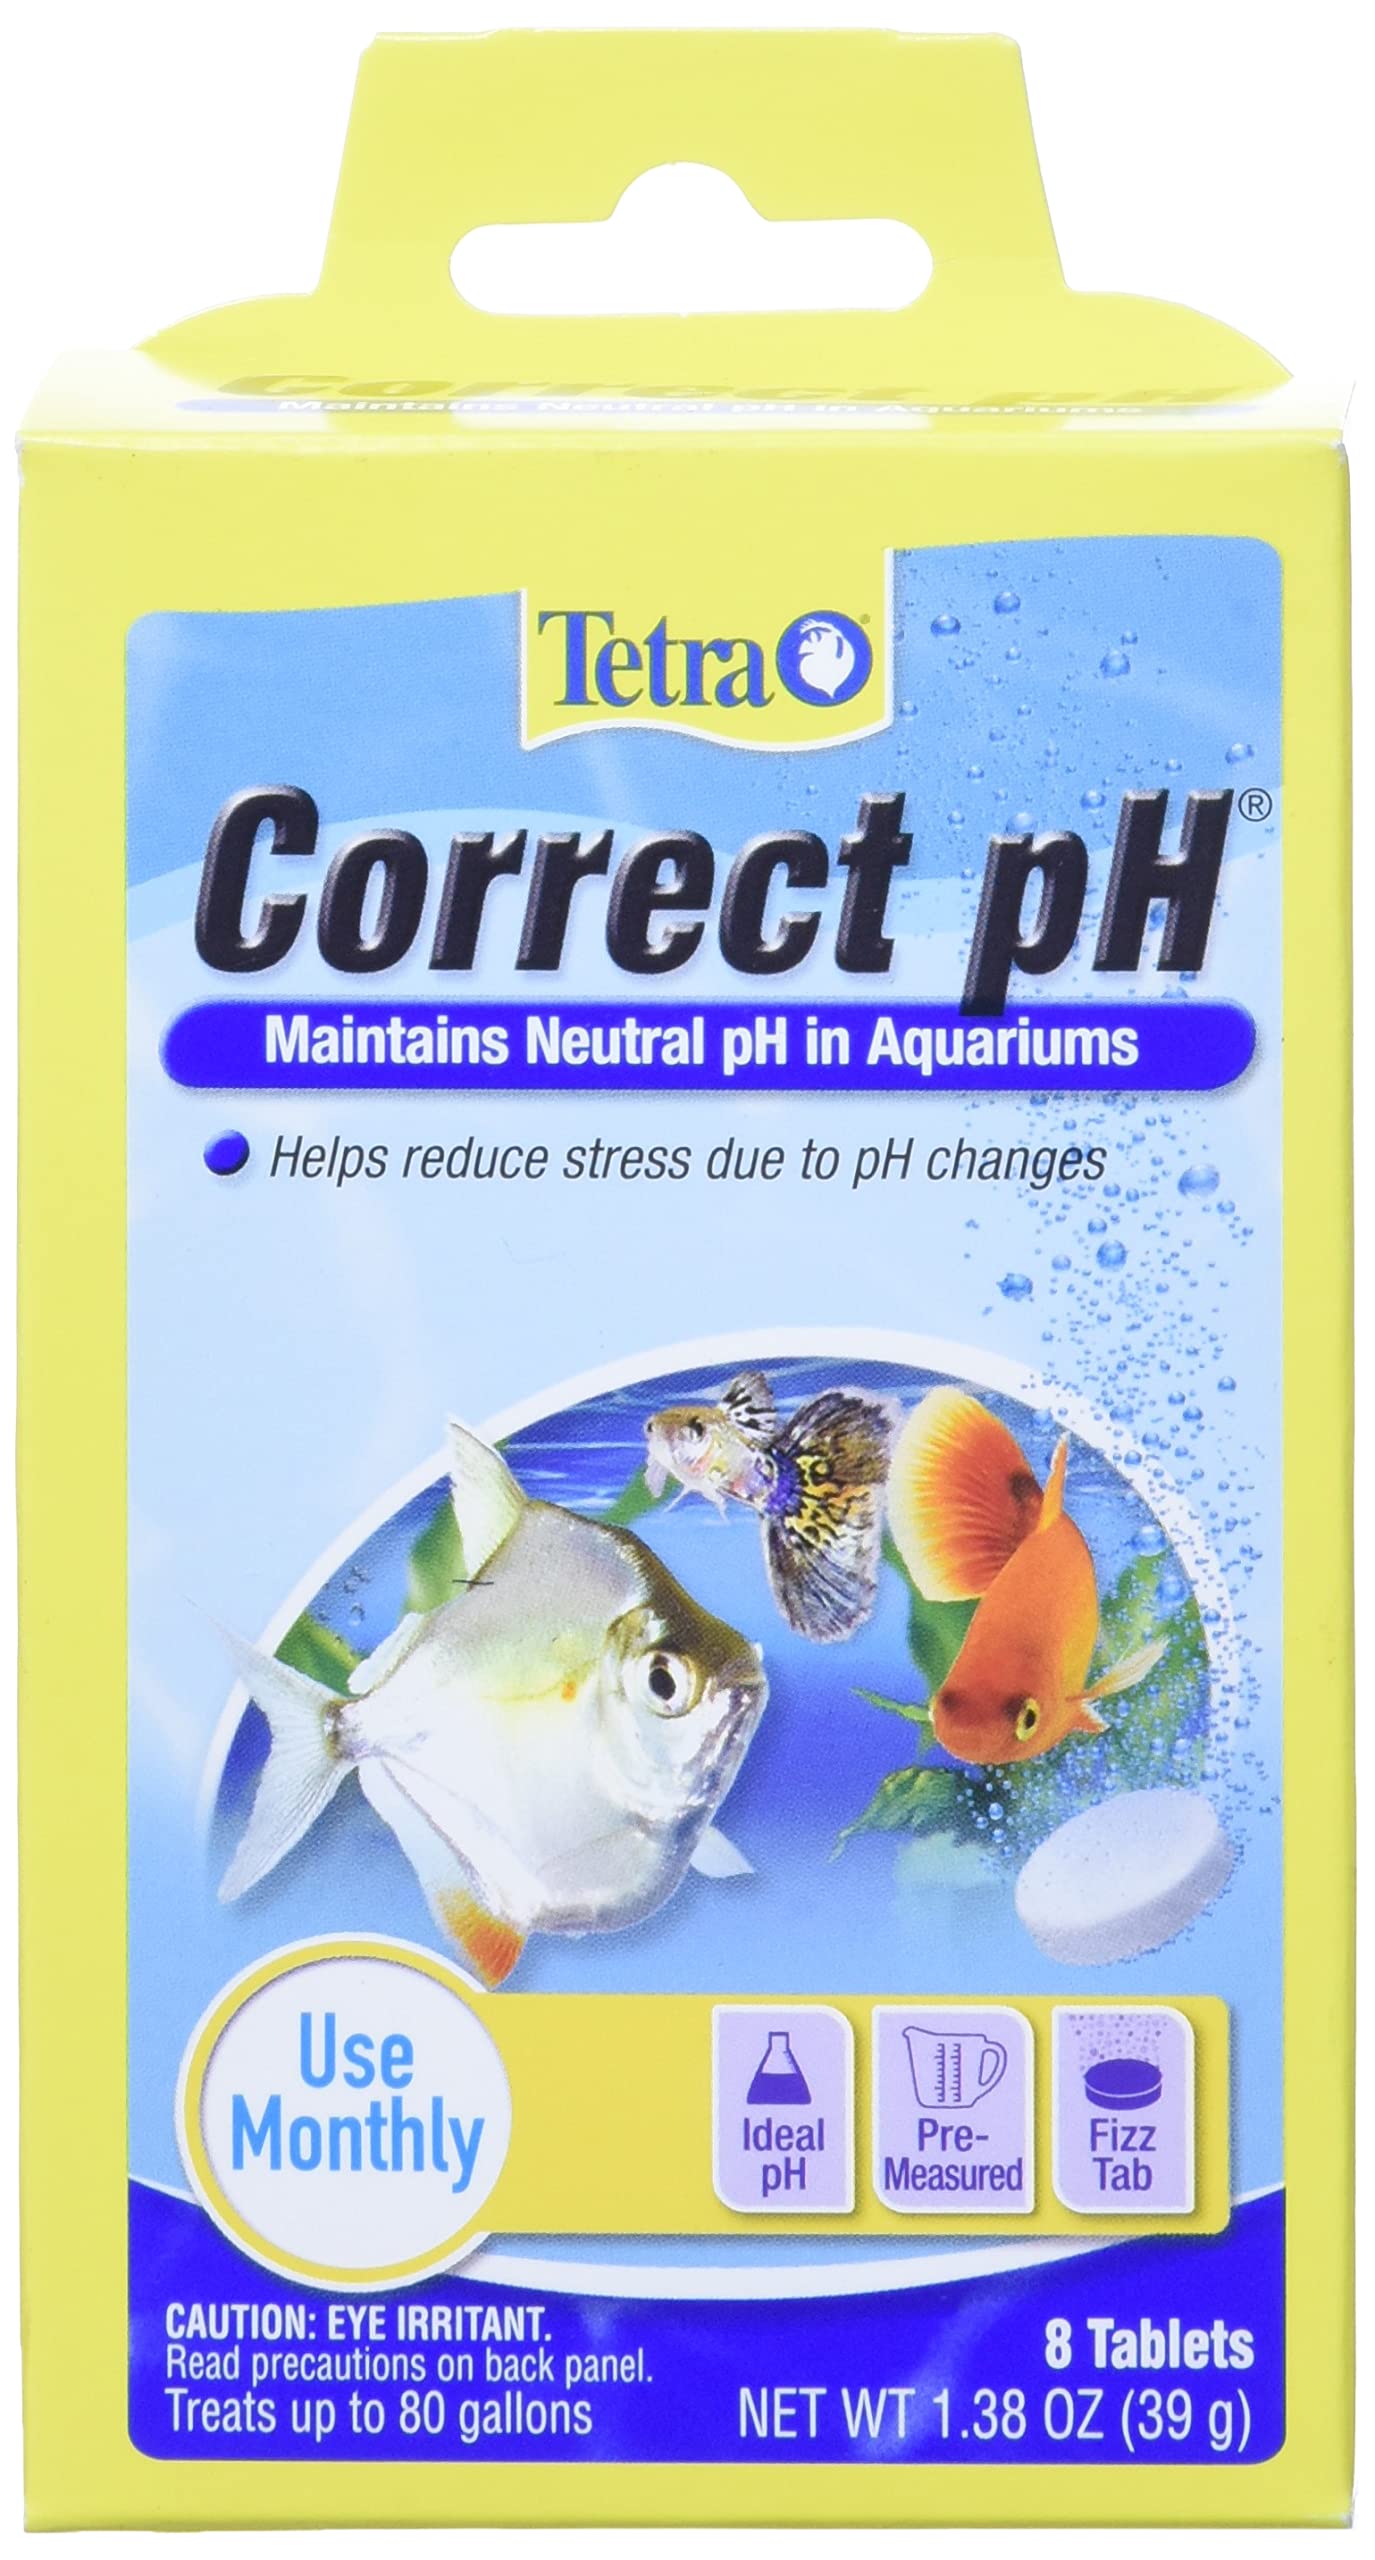 Tetra Correct pH Tablets: 8 Count for Aquarium Water